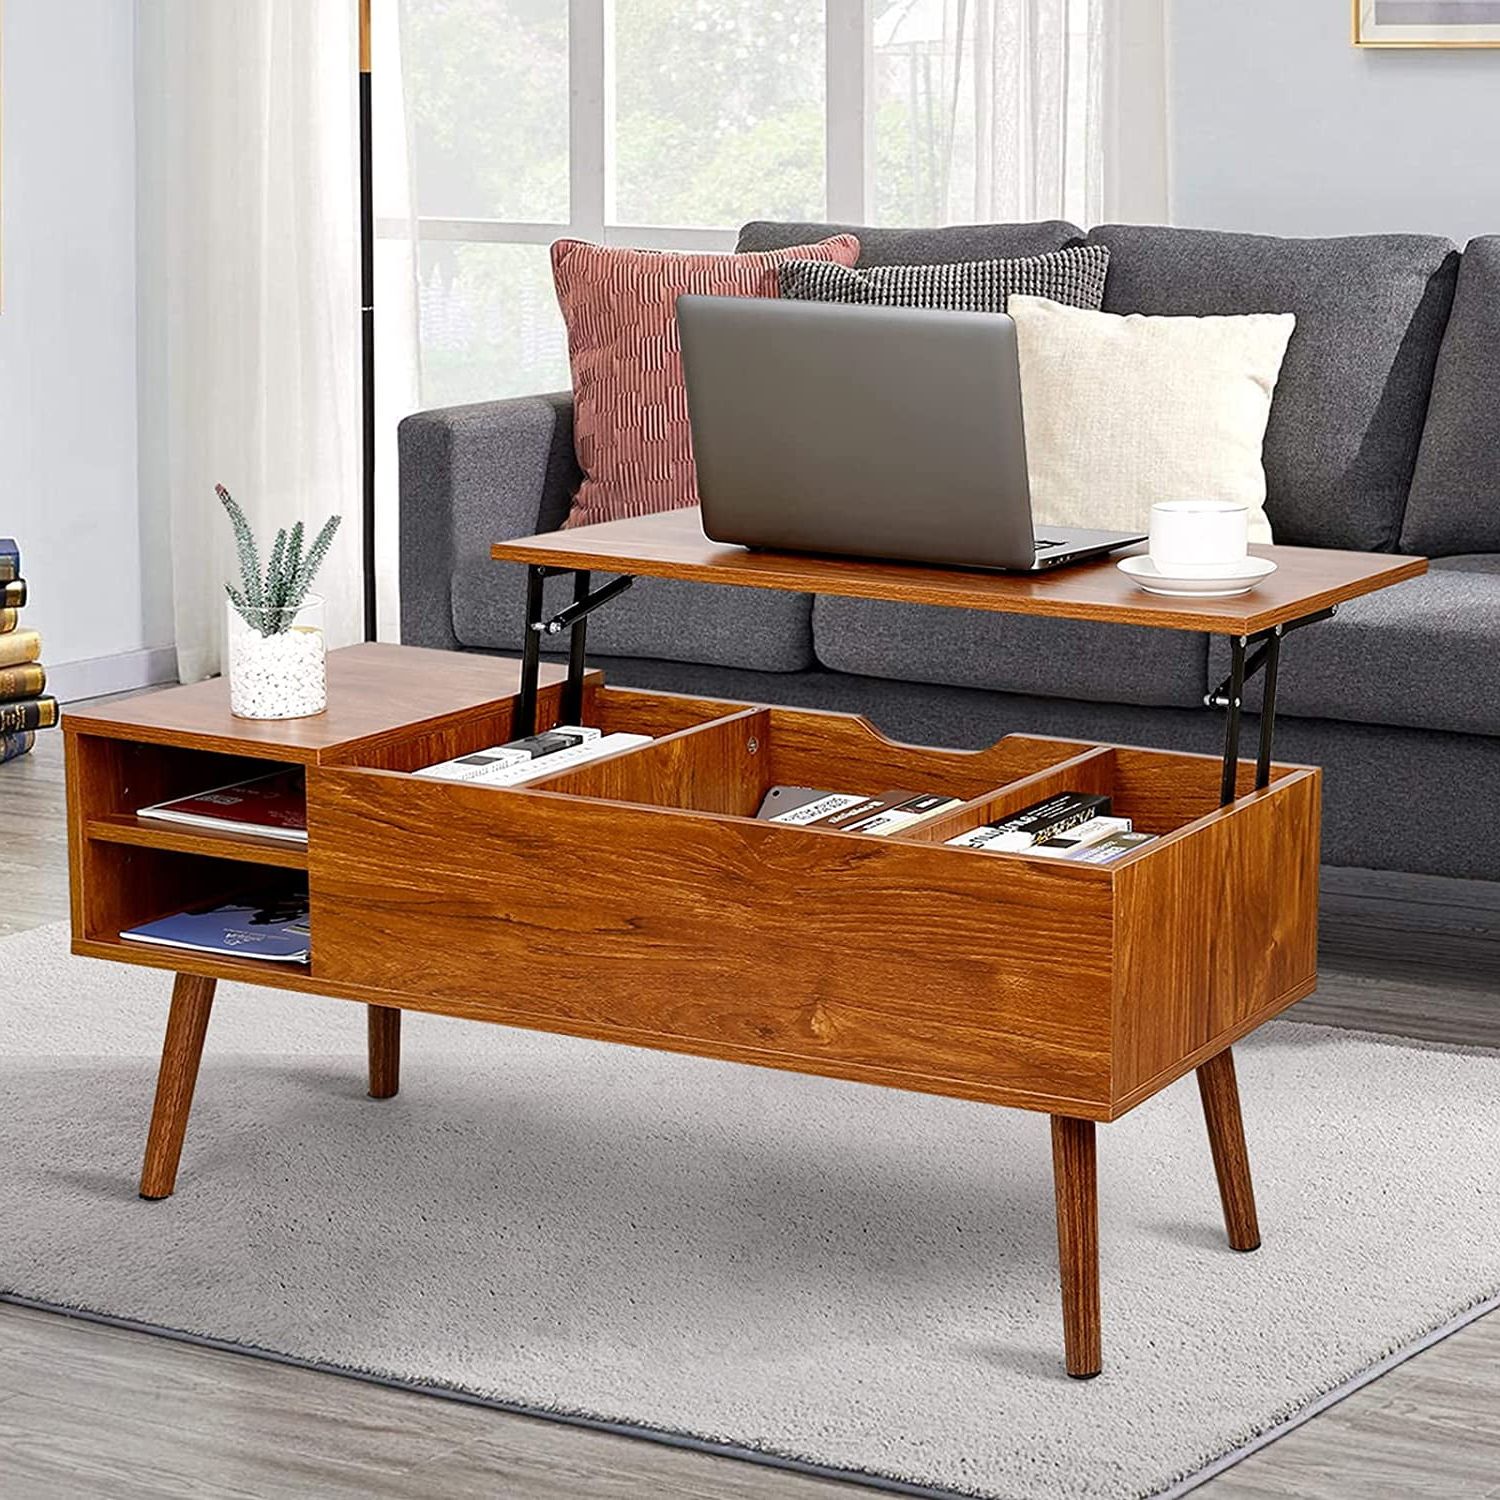 Modern Lift Top Coffee Table With Hidden Compartment Storage,adjustable Throughout 2019 Coffee Tables With Hidden Compartments (View 4 of 15)